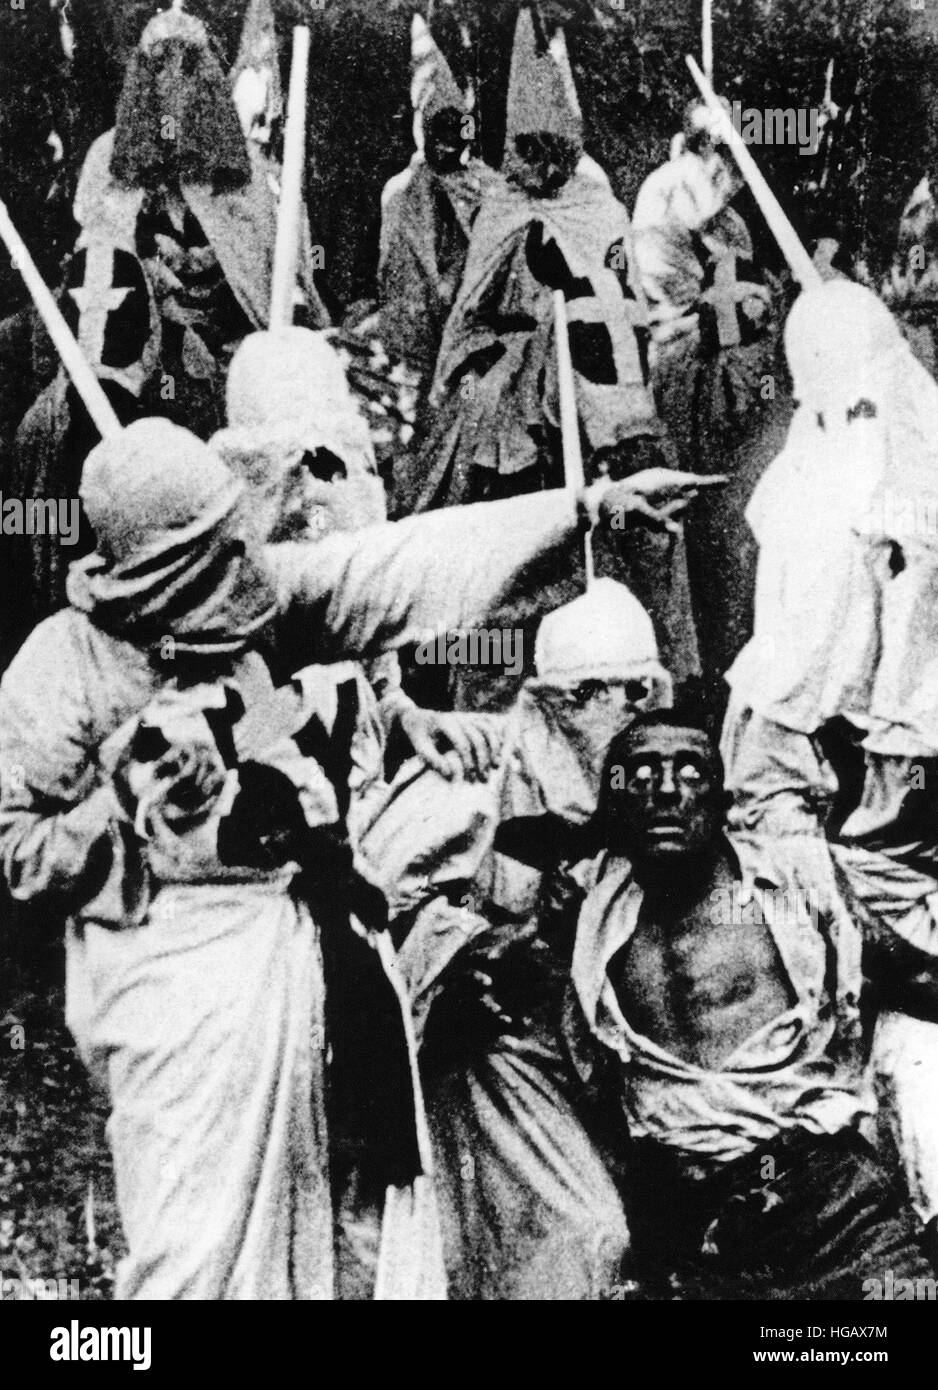 THE BIRTH OF A NATION 1915 D.W.Griffith silent film. White actor Walter Long in blackface as Gus in the grip of the KKK.  In the film captions he is described as '...a renegade, a product of the vicious doctrines spread by the carpetbaggers' Stock Photo